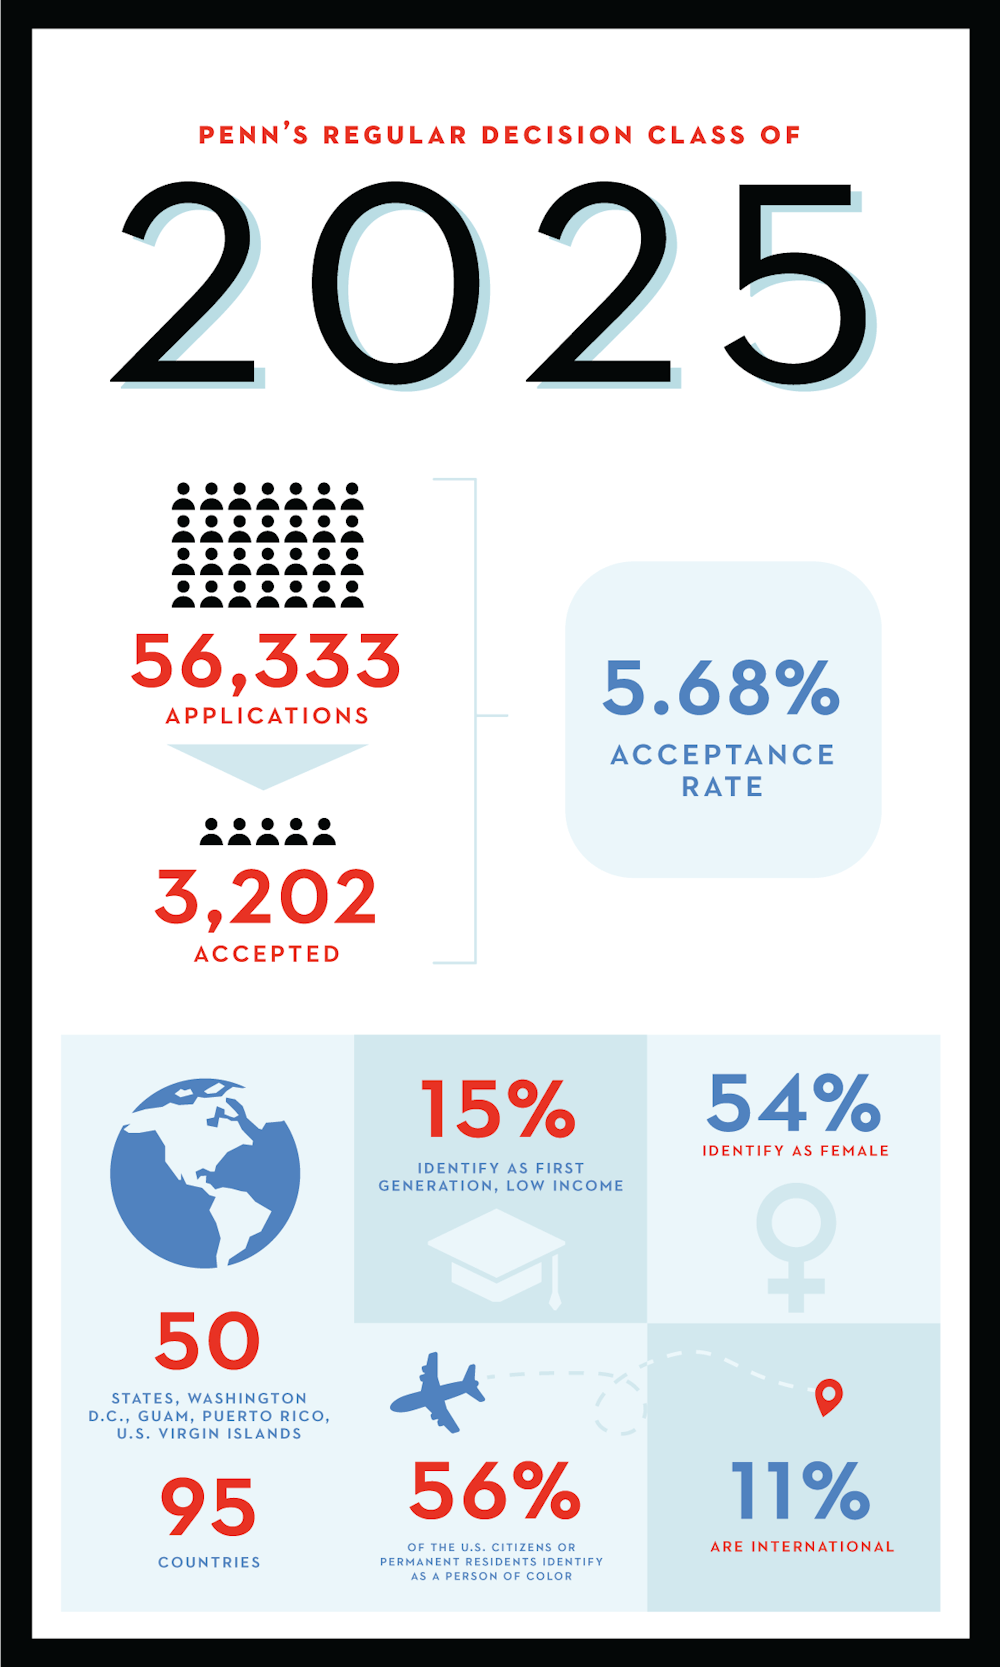 Penn accepts recordlow 5.68 of applicants to the Class of 2025 The